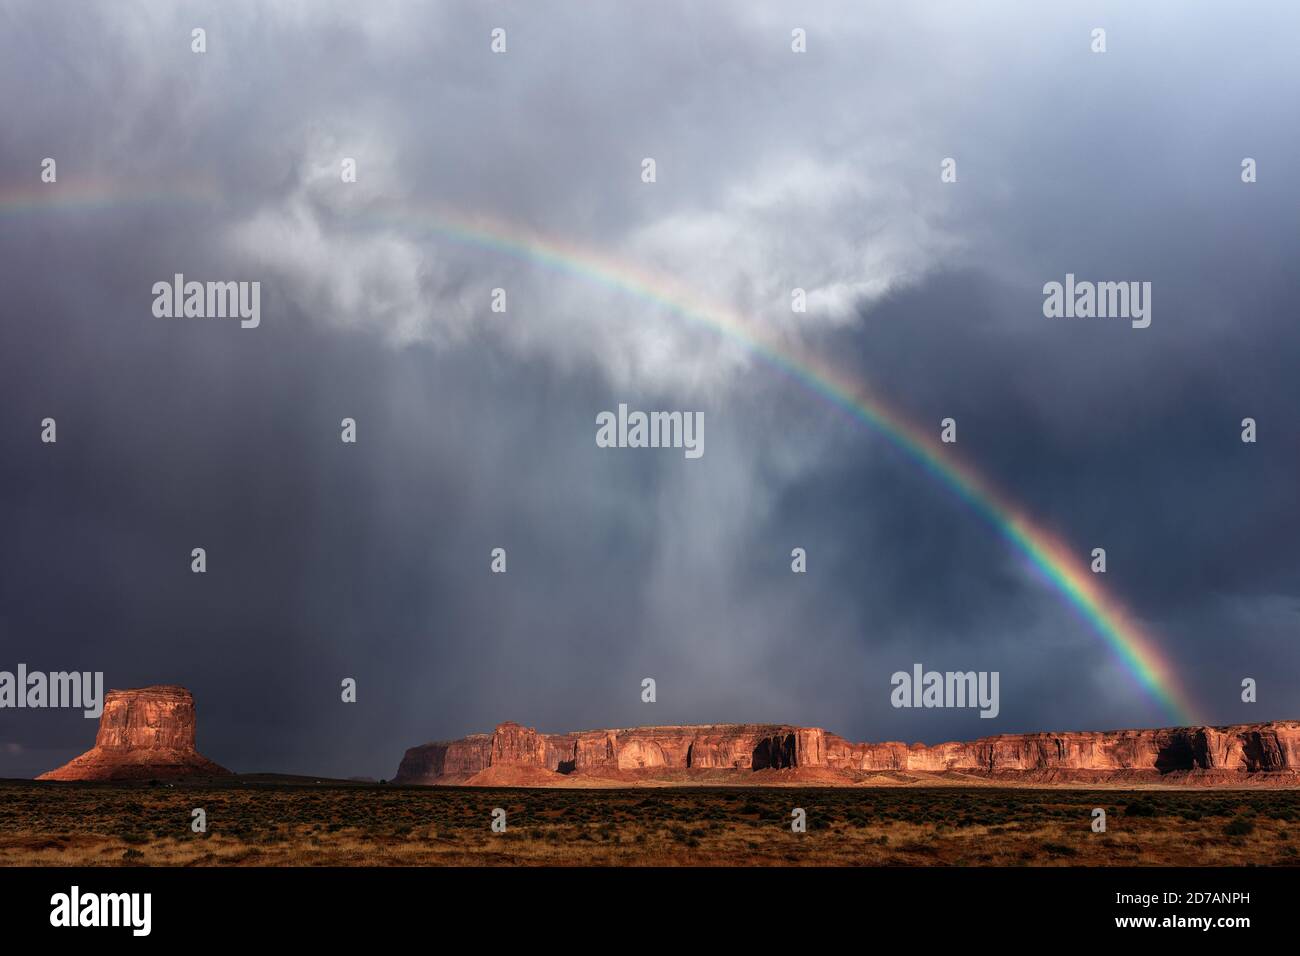 Scenic landscape with a storm and rainbow over Monument Valley, Arizona, USA Stock Photo